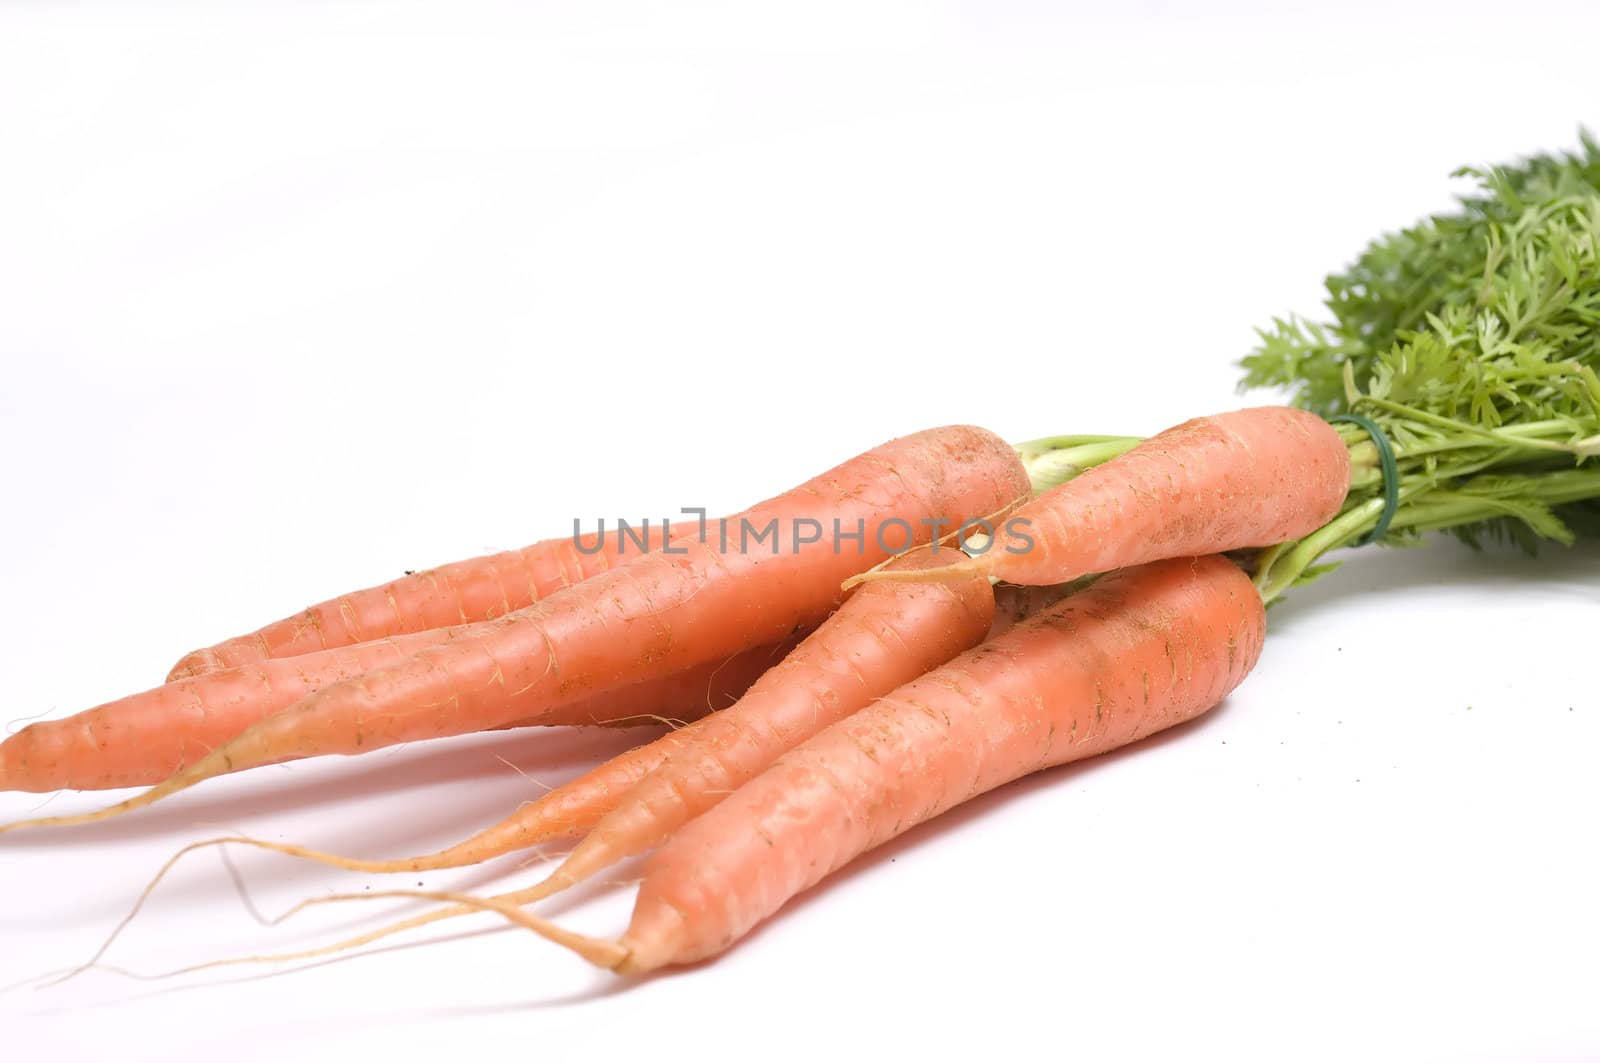 stack of fresh carrots with green leaves, just picked from the garden, isolated on white